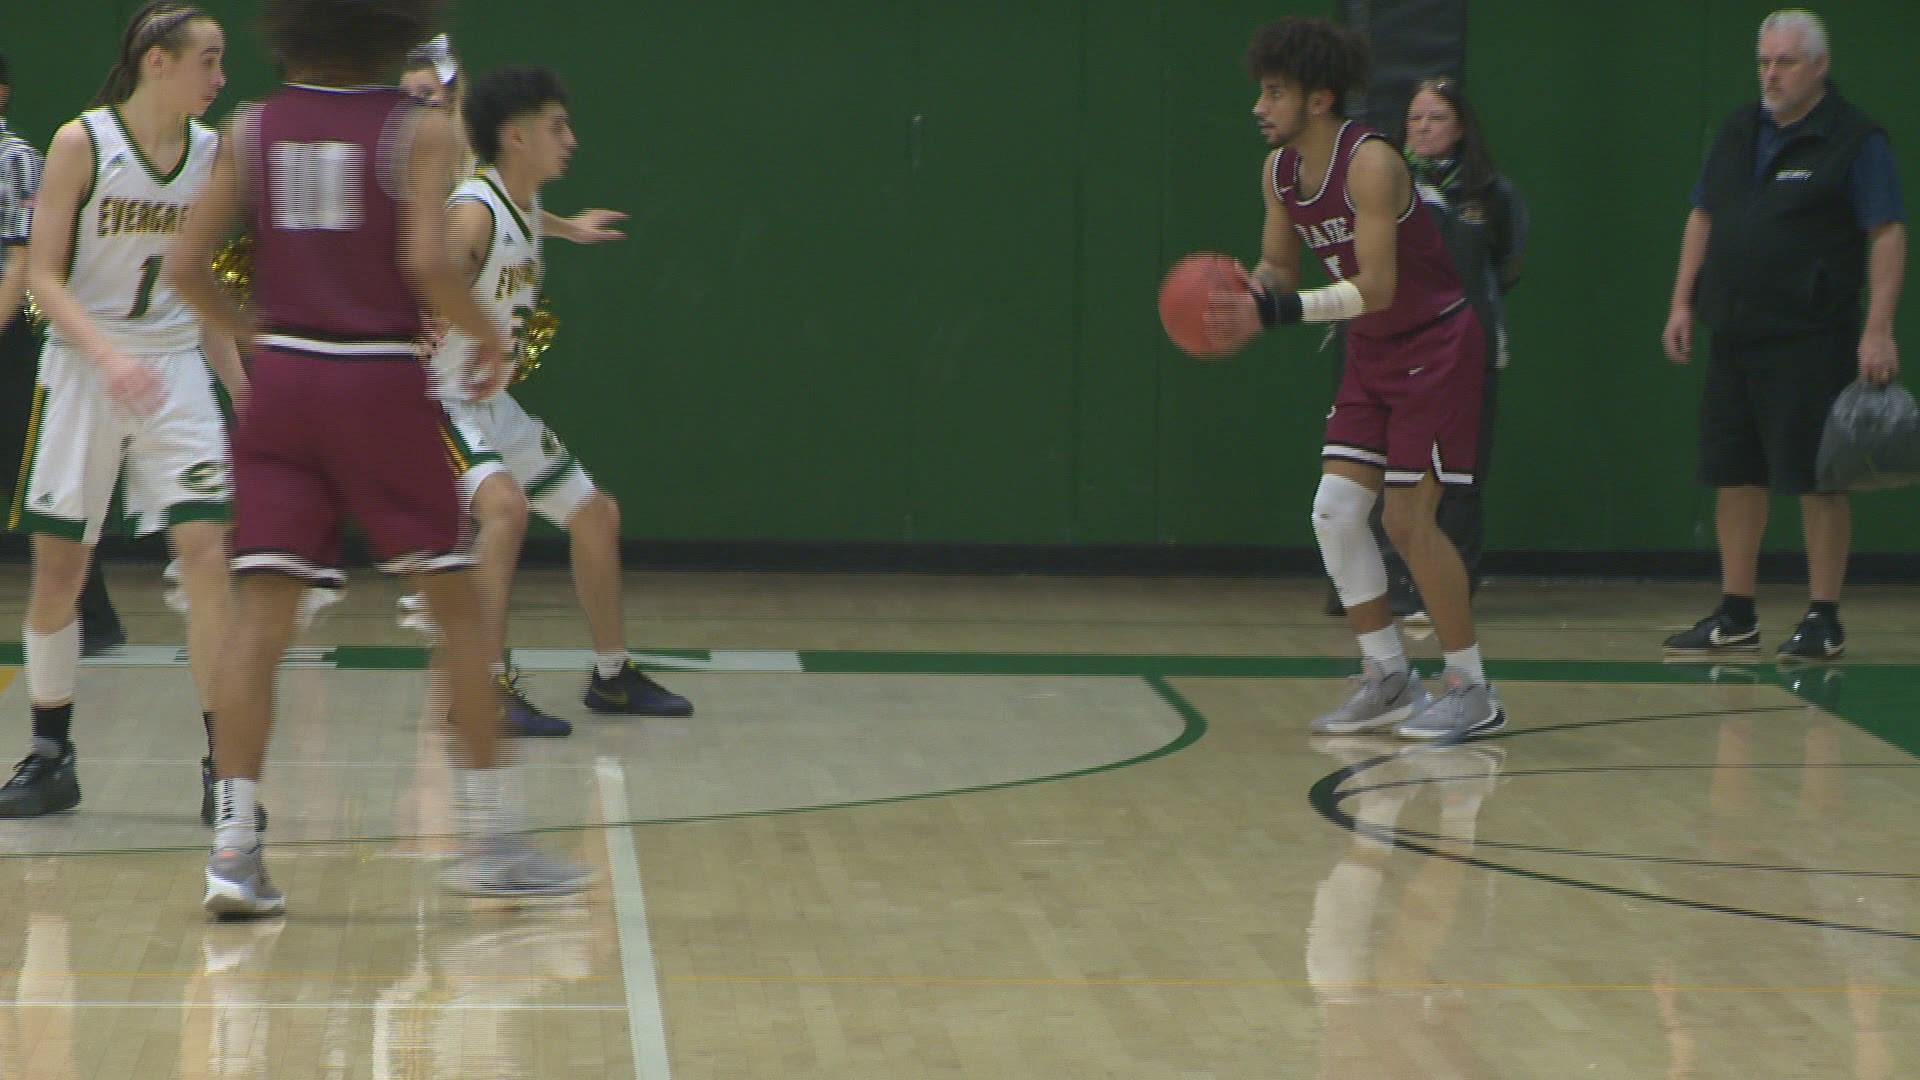 Highlights of Evergreen's 63-57 win over Prairie on Jan. 24, 2020. Highlights are part of KGW's Friday Night Hoops with Orlando Sanchez.